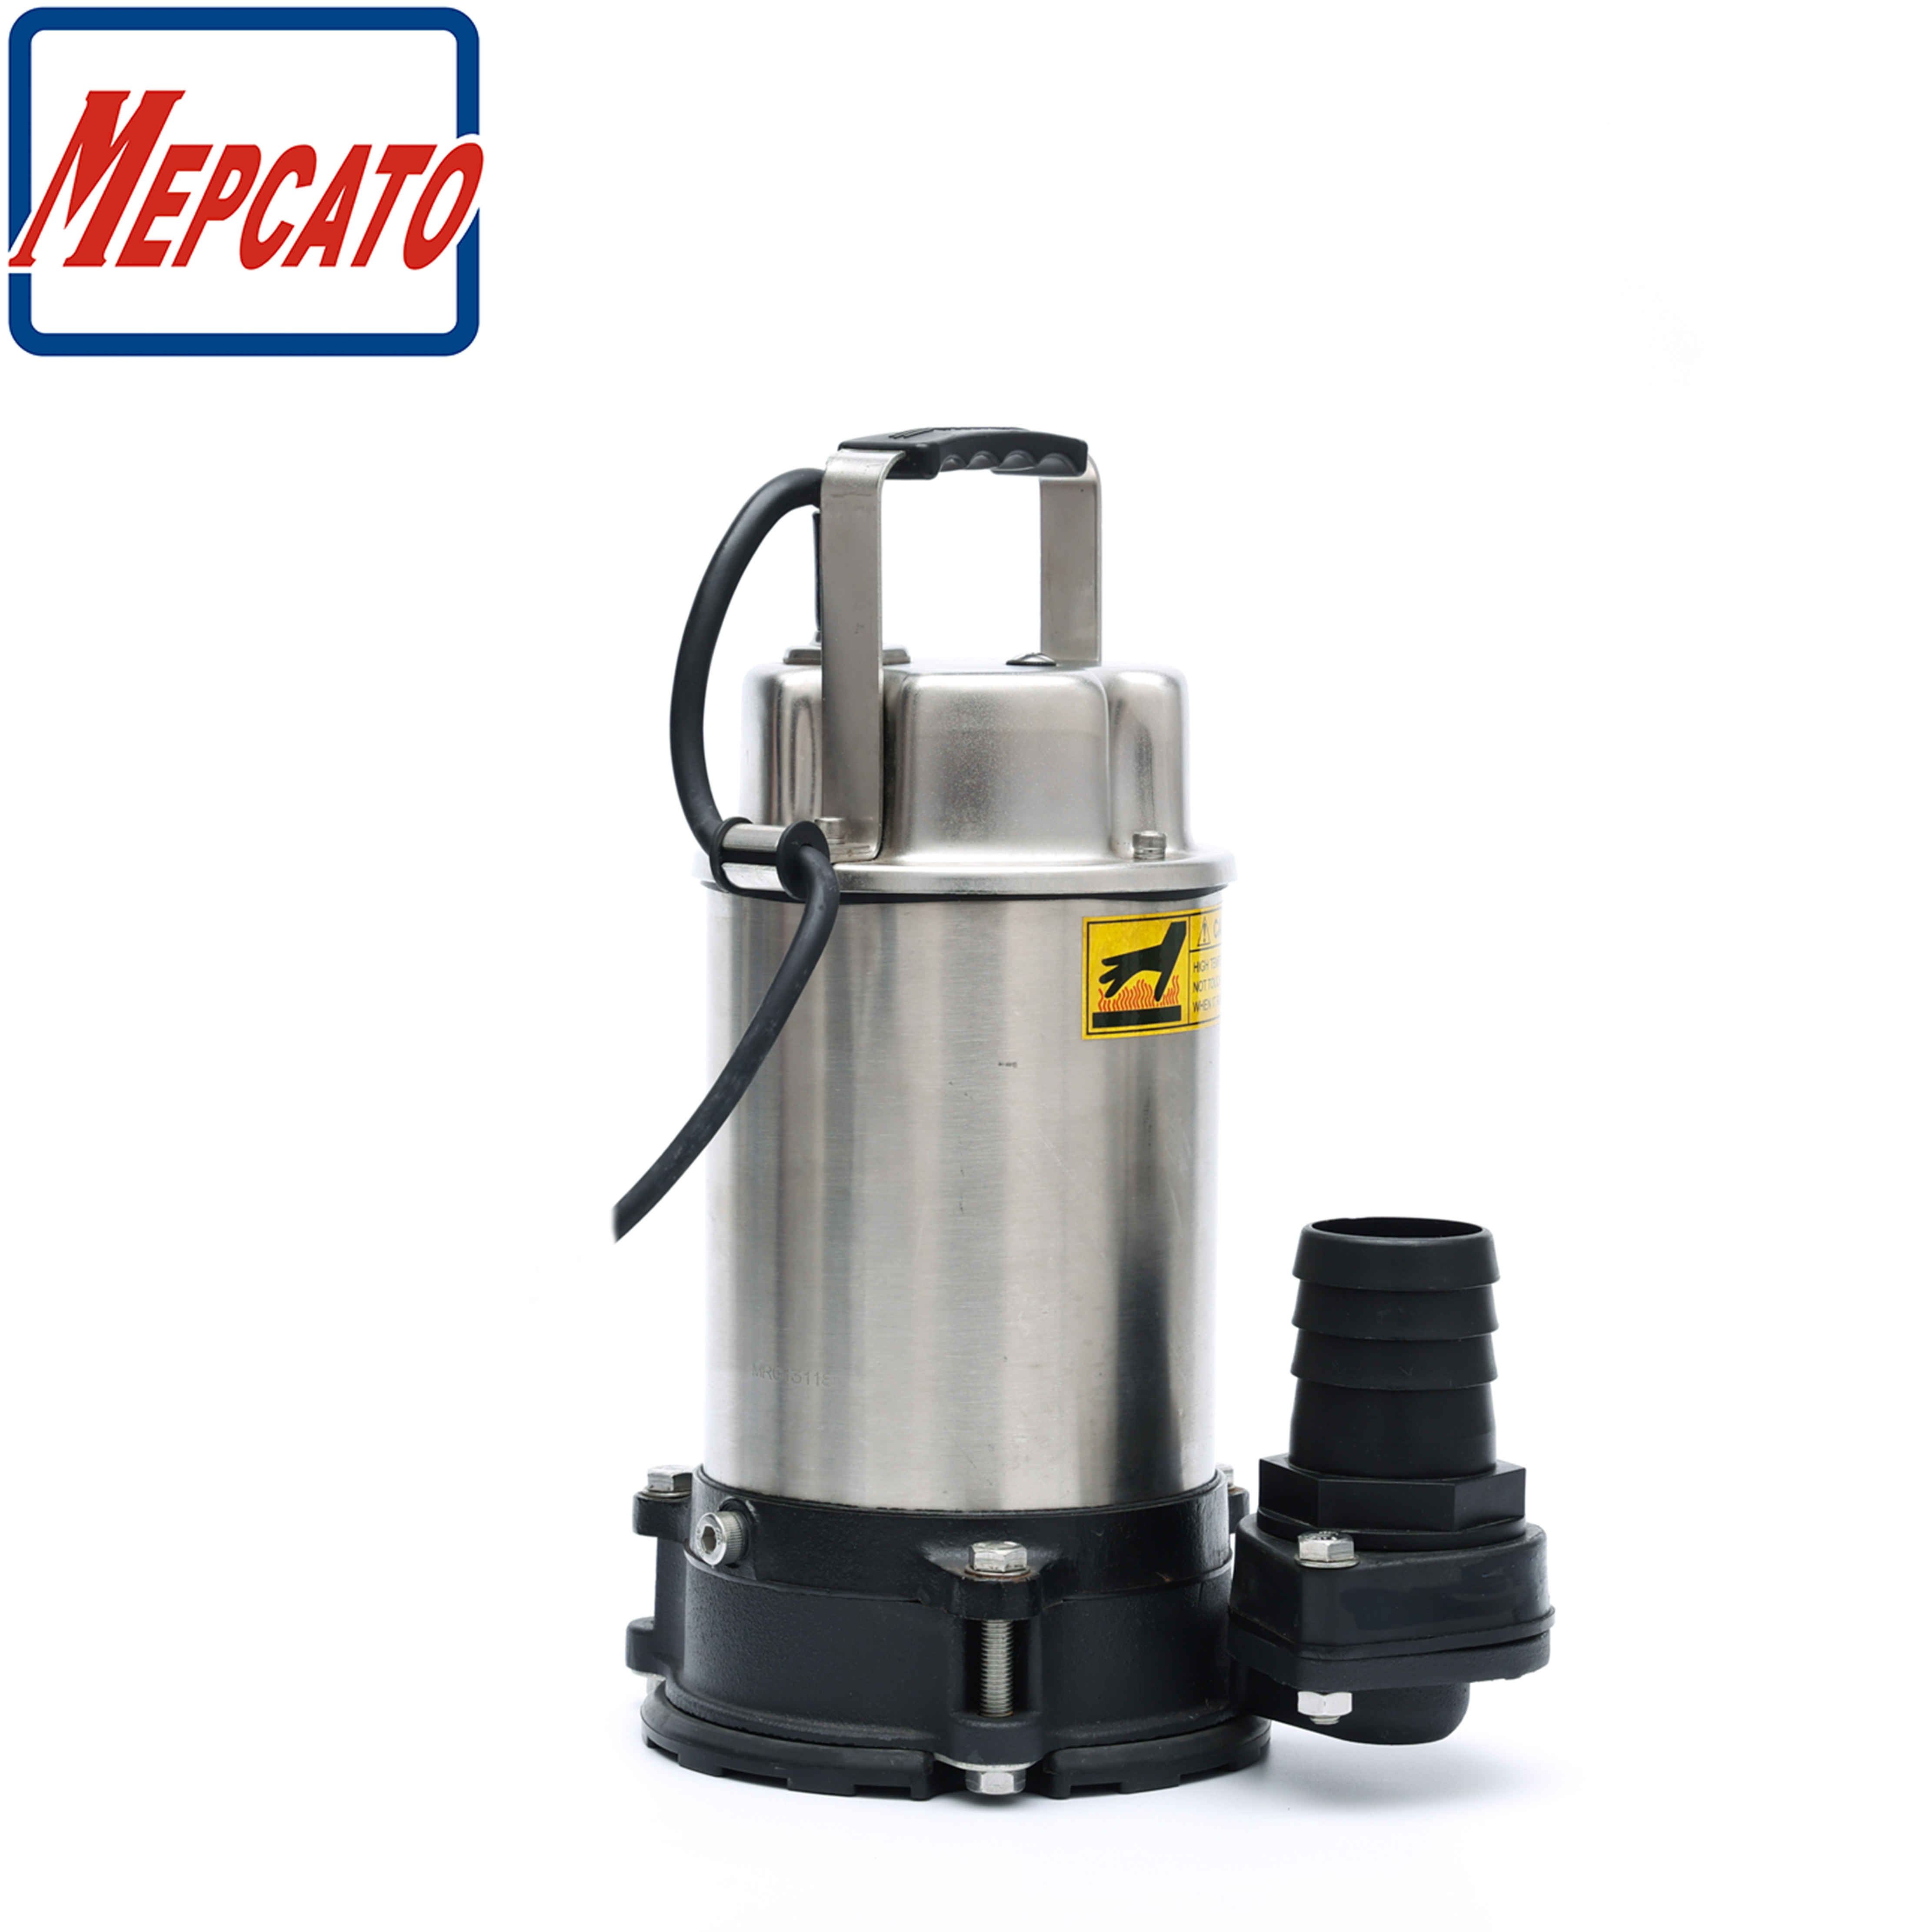 400W 1mm Low Level Running Residual Water Groundwater Rainy Water Drainage Stainless Steel Electric Automatic Centrifugal Submersible Dewatering Pump